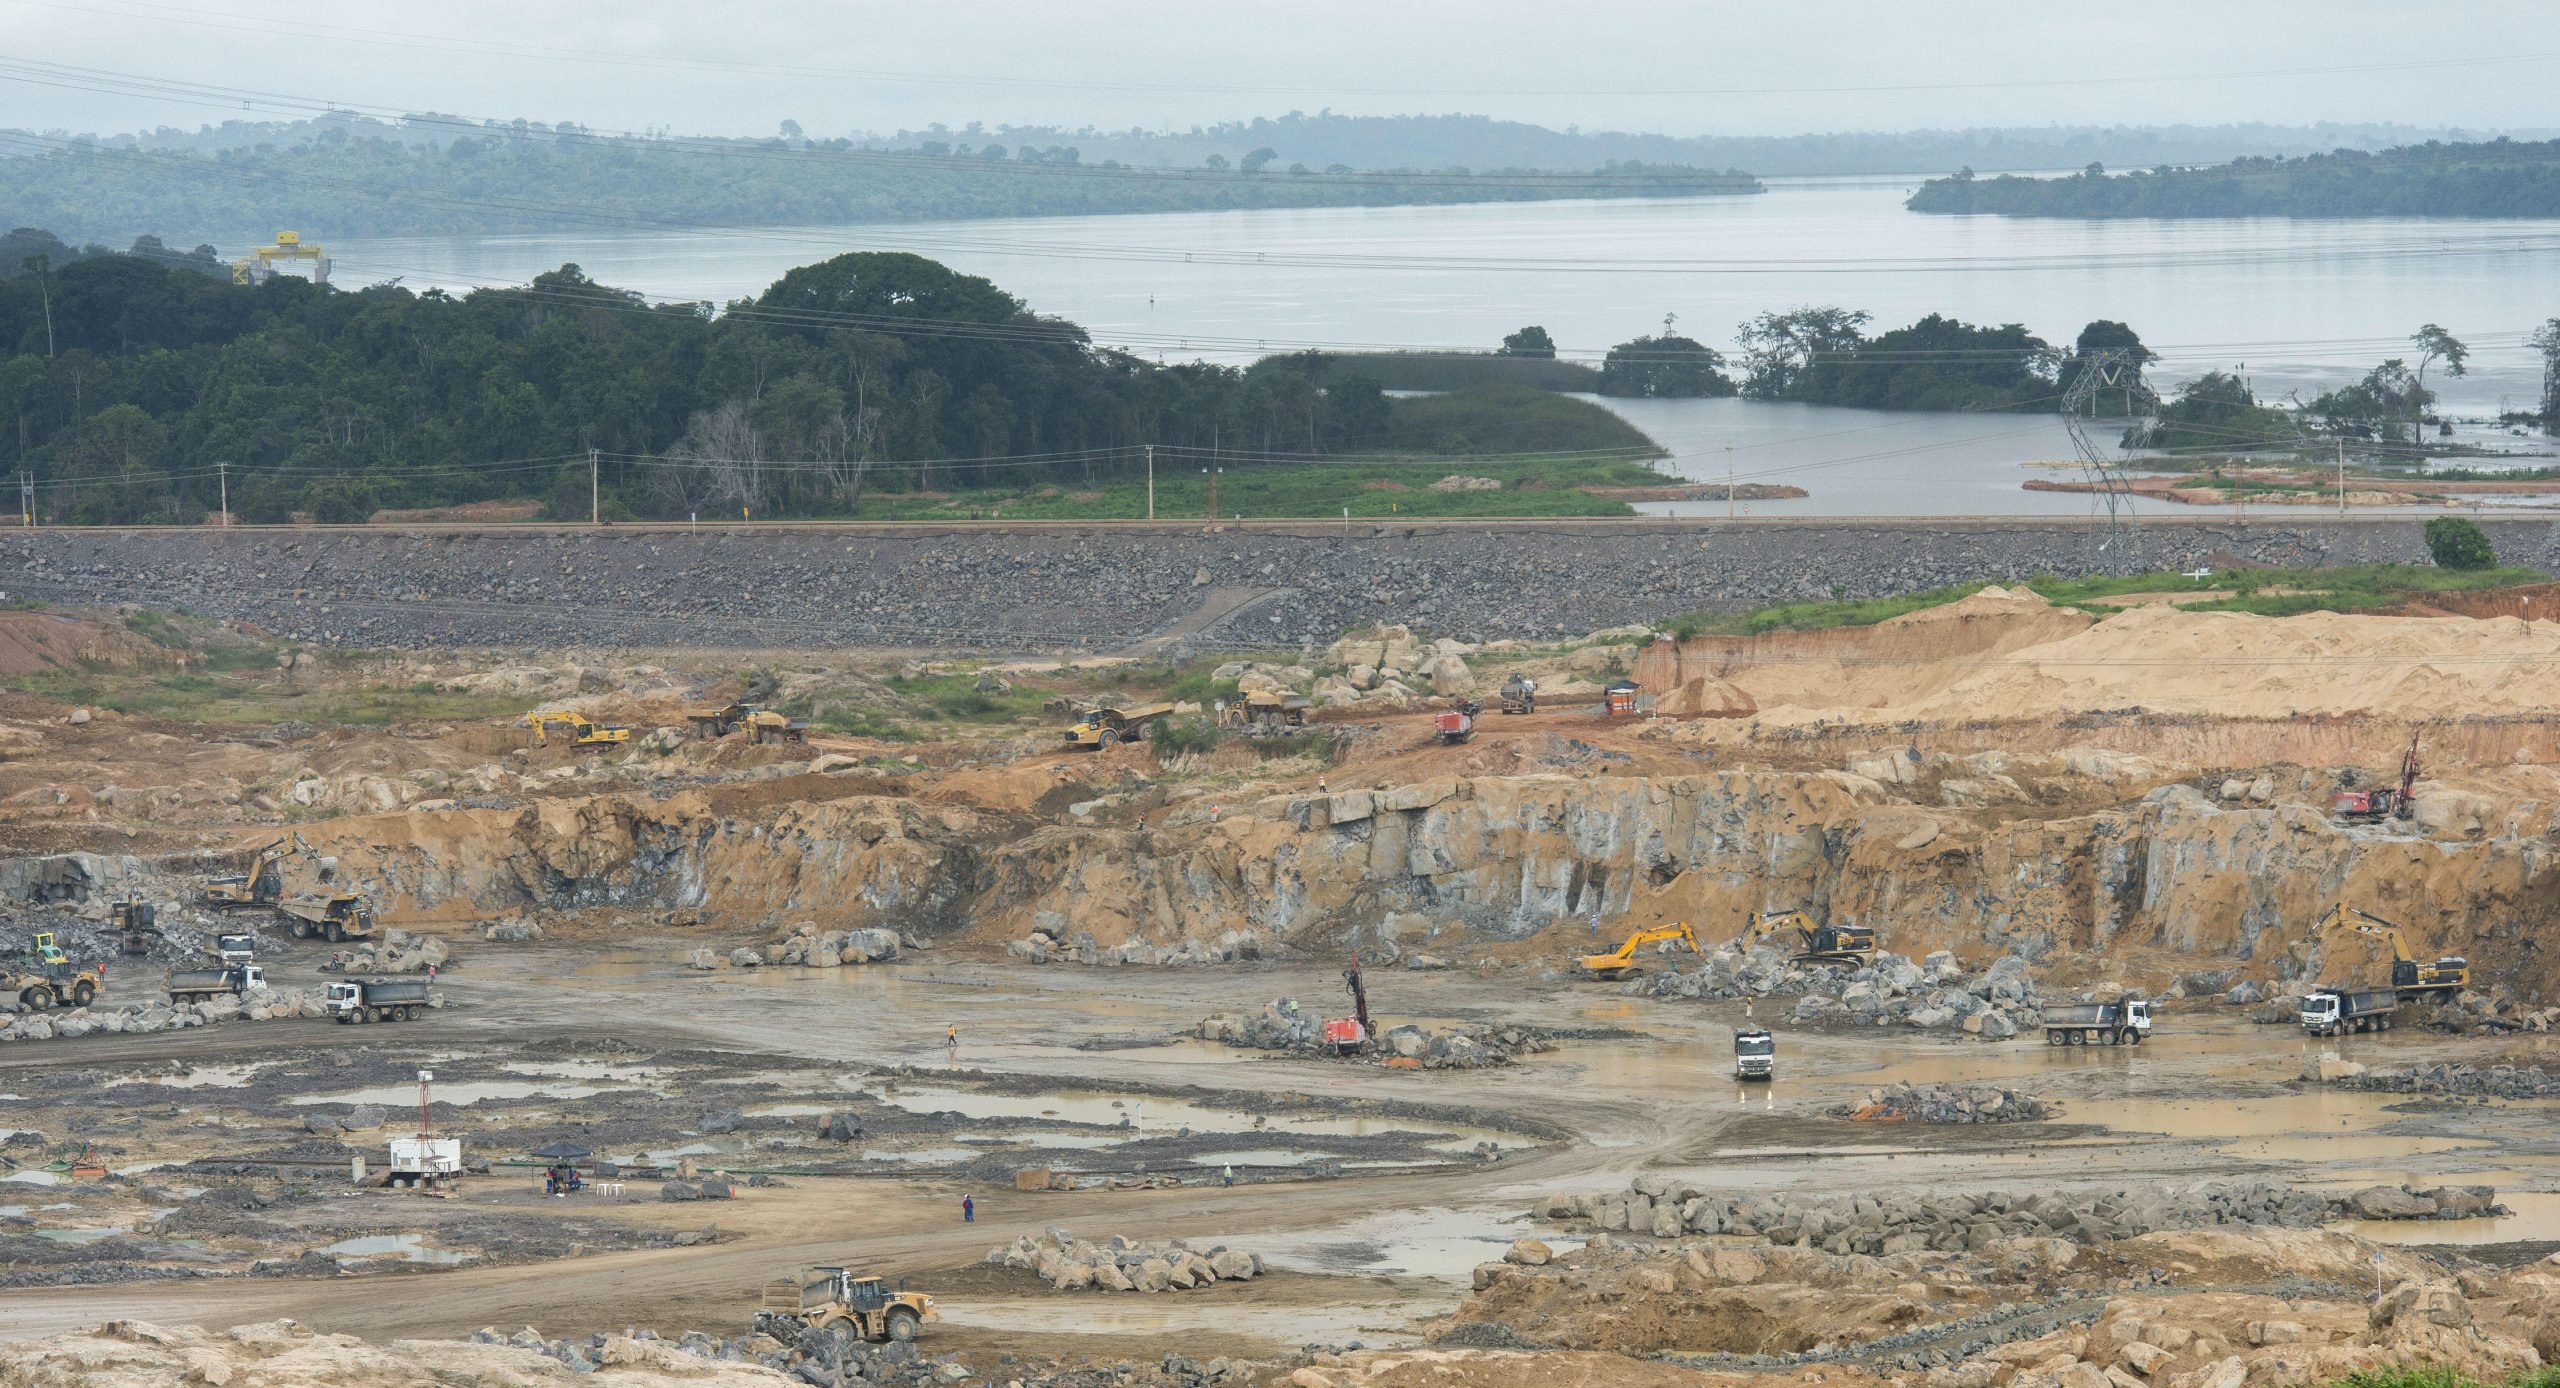 Construction of the Belo Monte hydroelectric power plant in the Brazilian Amazon